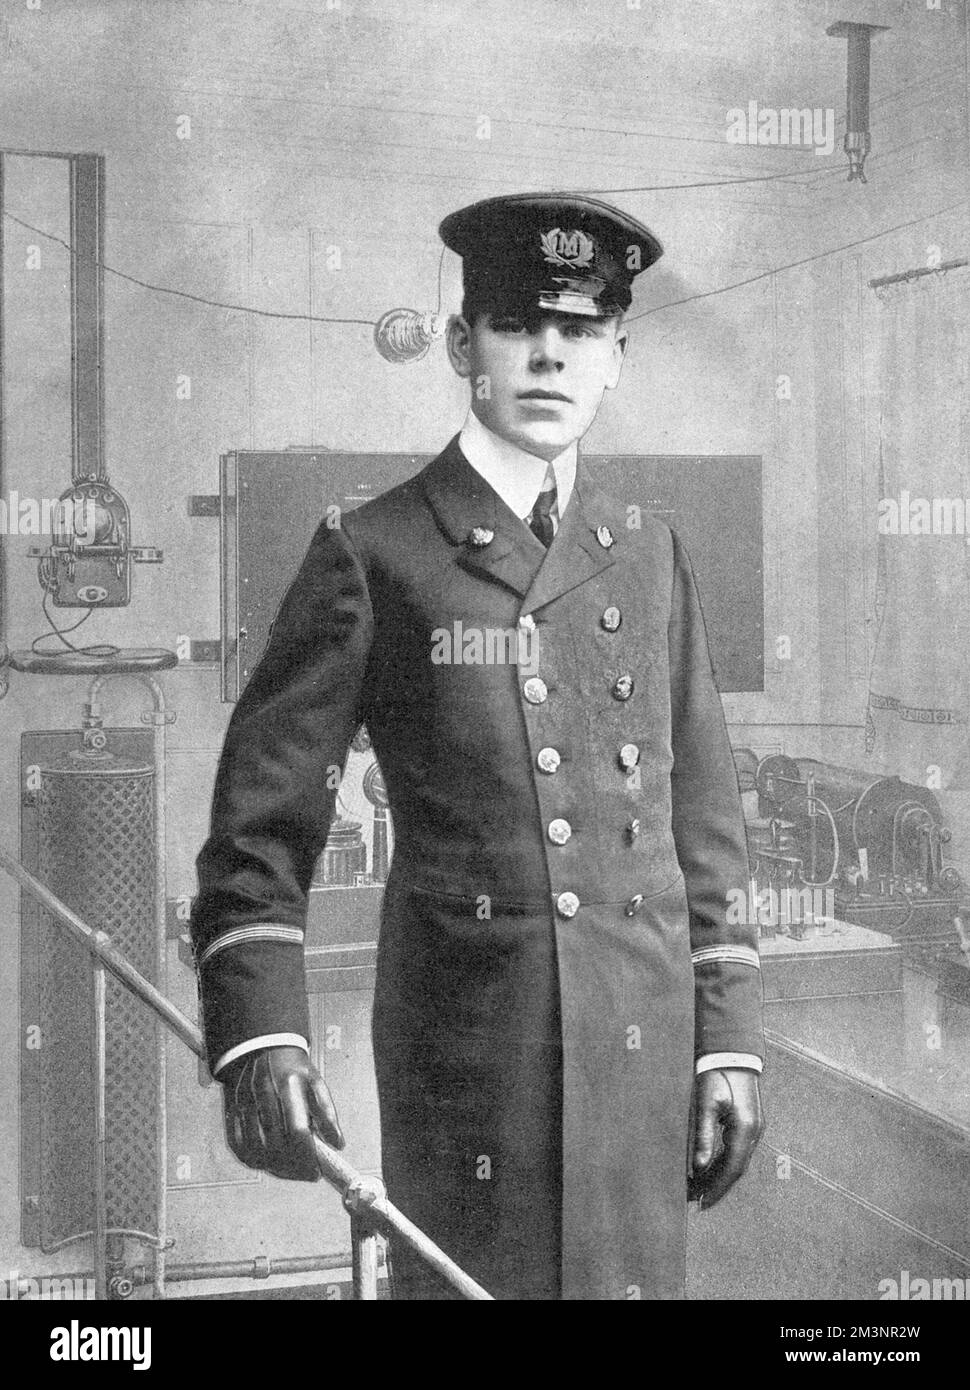 Jack Binns, the wireless-telegraph operator on the RMS Republic that sank after colliding with the SS Florida on 23rd January 1909, near Nantucket, Massachusetts. Republic was issued with the new Marconi wireless telegraph system and became the first ever ship to issue a CQD (Come Quickly, Danger) distress signal, when Jack Binns transmitted the message for fourteen hours straight amidst the wreck of the wireless office. The Republic sank on 24th January, after passengers had been painstakingly transferred to the Florida, and then the White Star liner RMS Baltic.     Date: 1909 Stock Photo